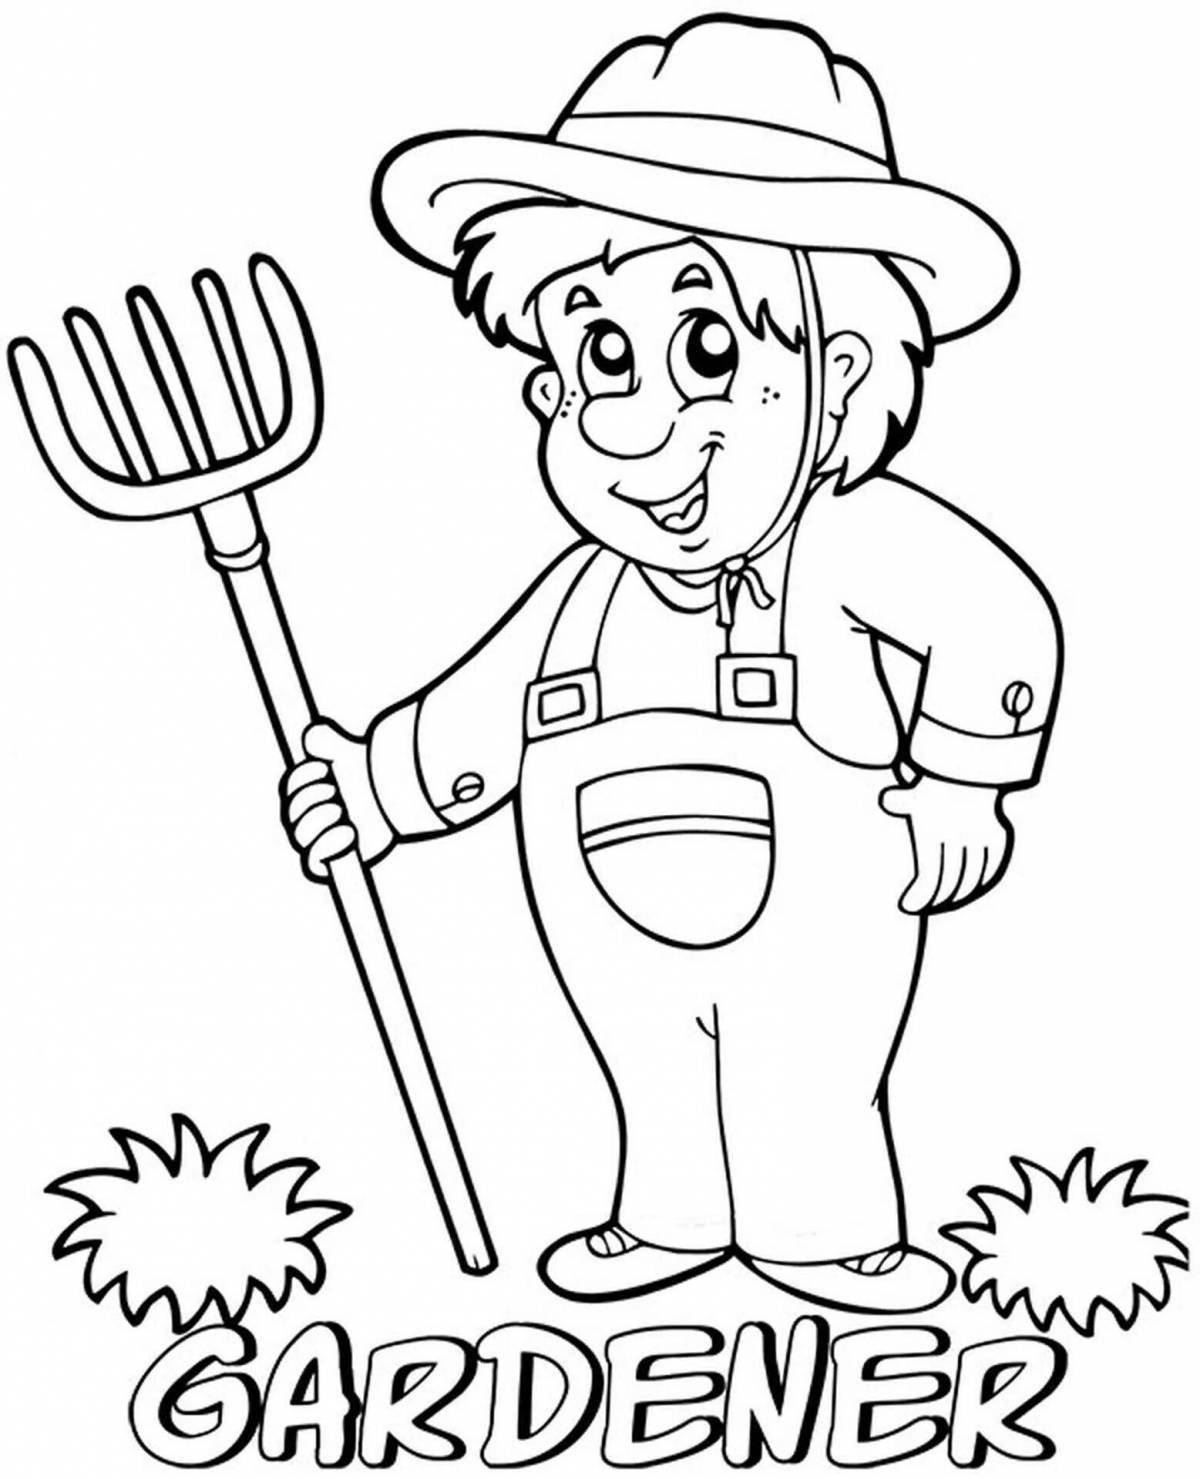 Farmer coloring page for kids